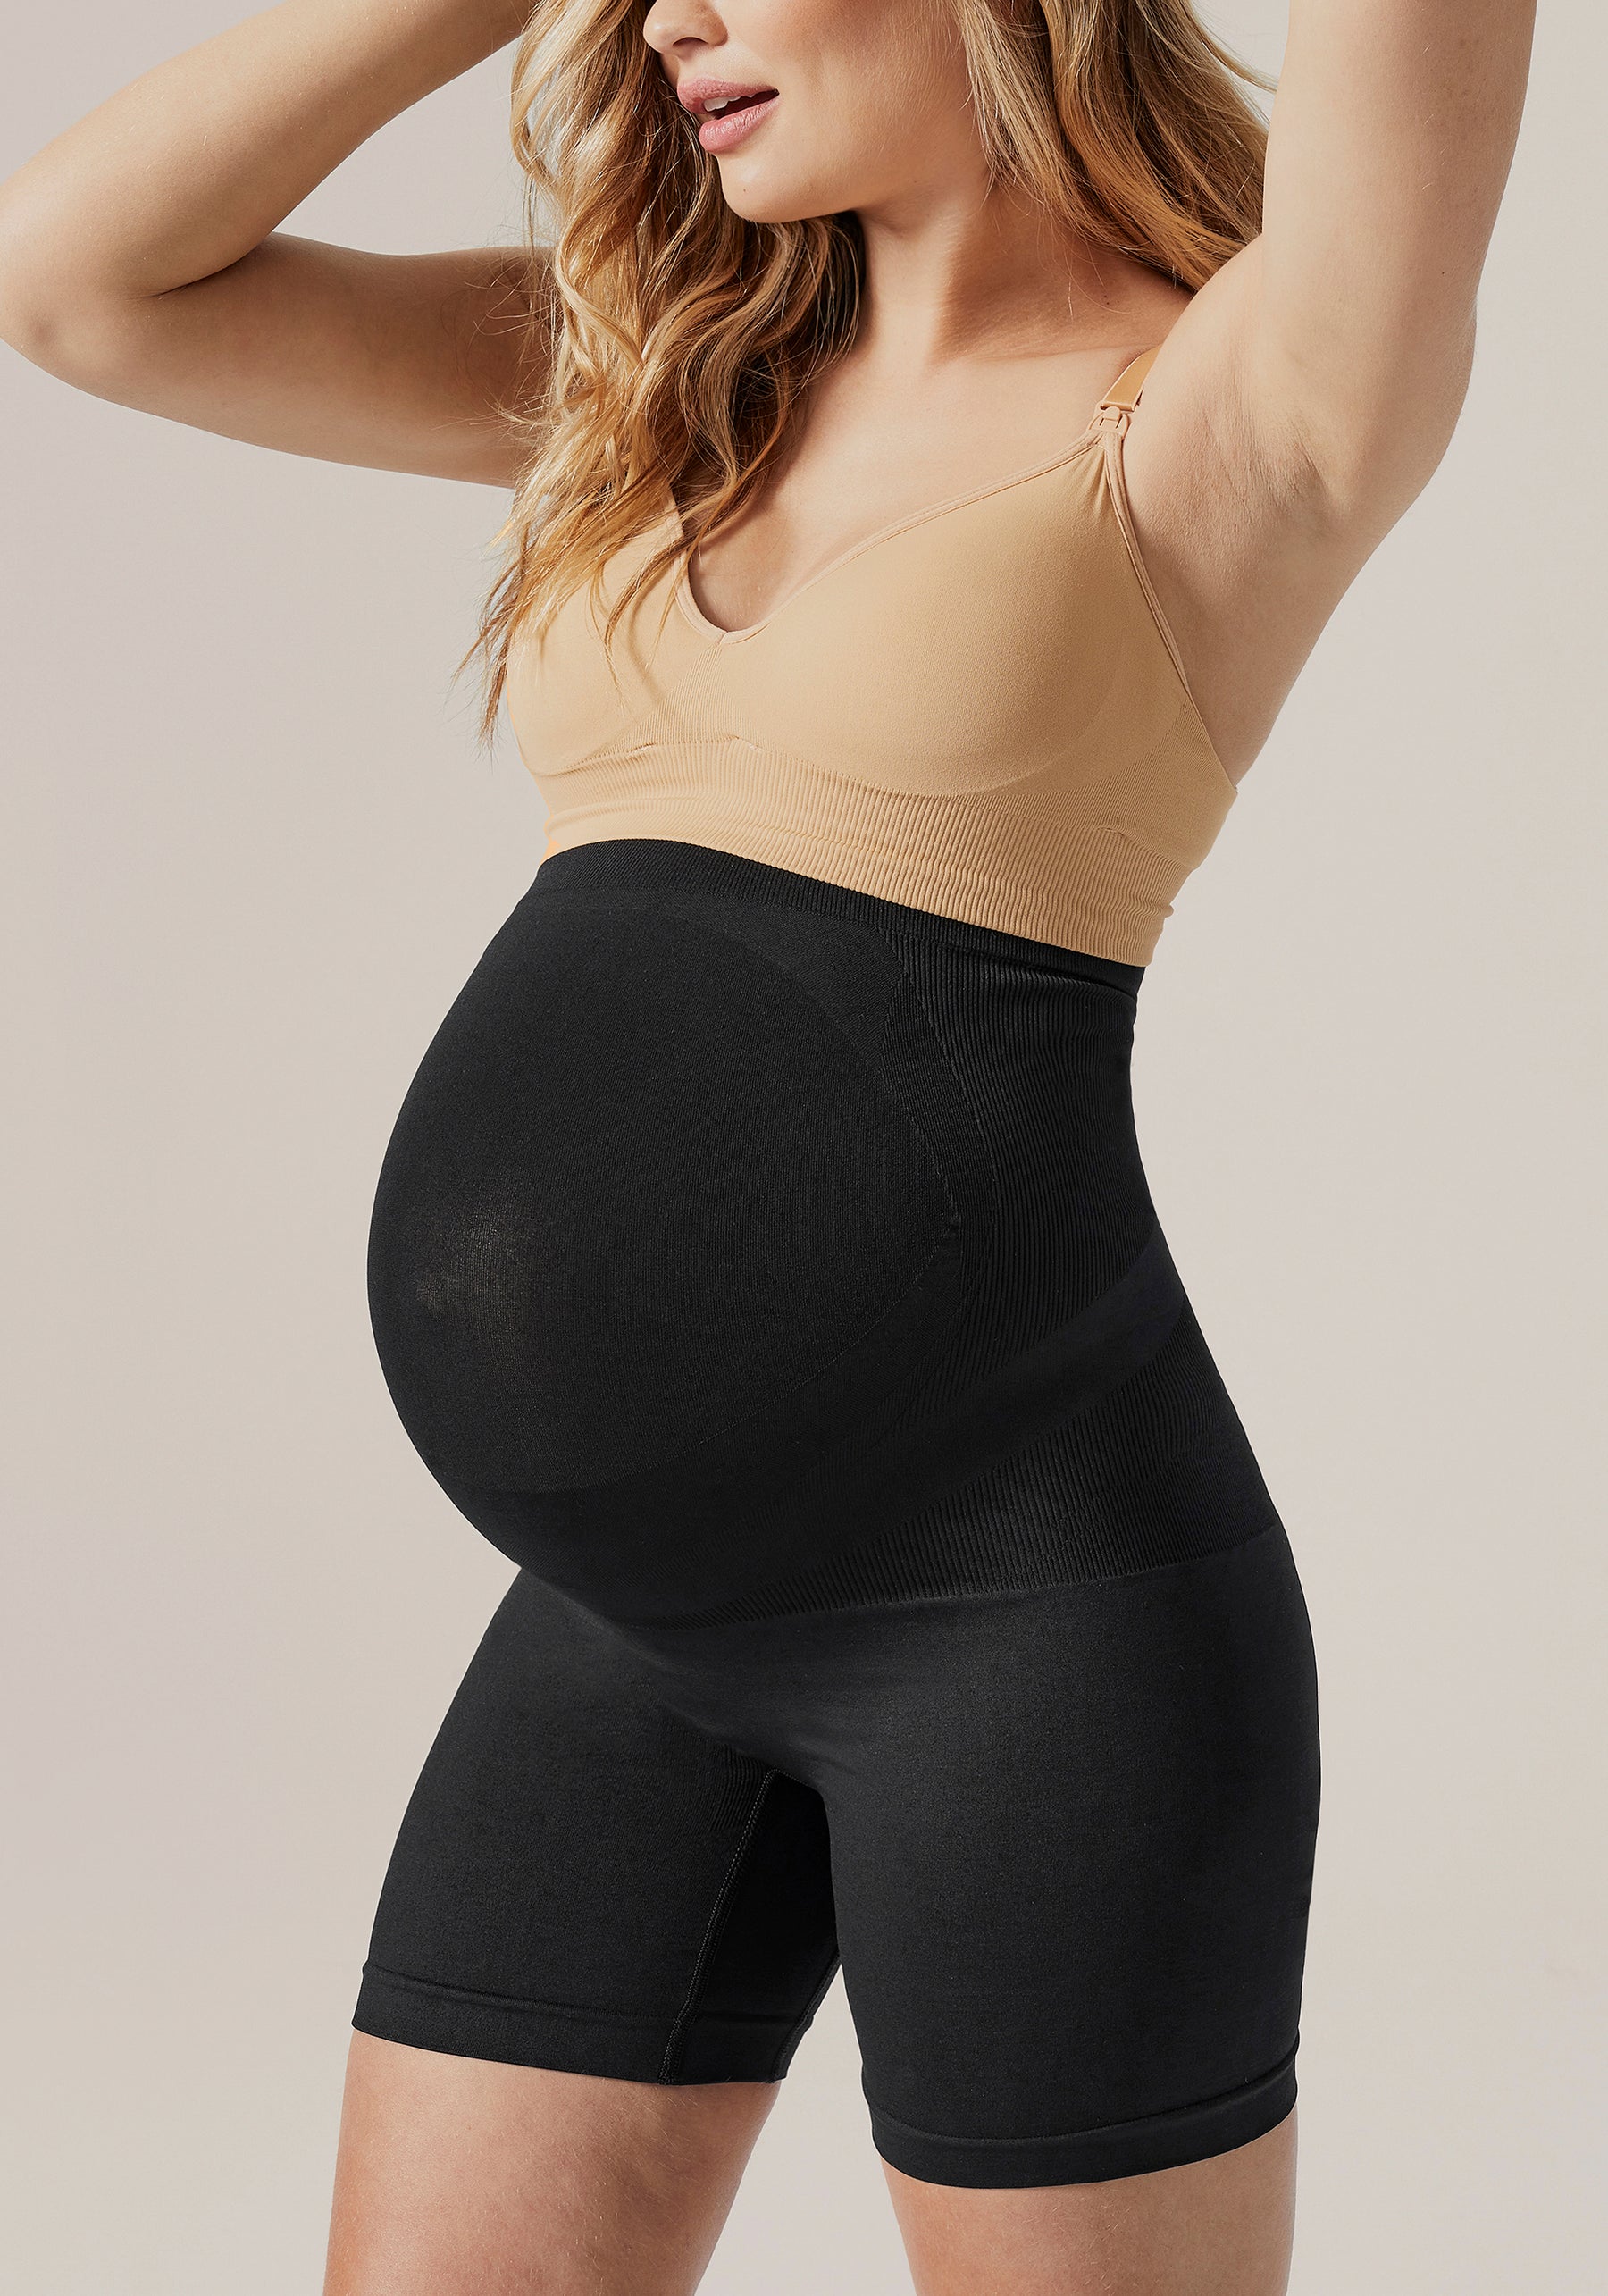 BLANQI Everyday Maternity Leggings Belly Support Full Coverage Seamless  Black M